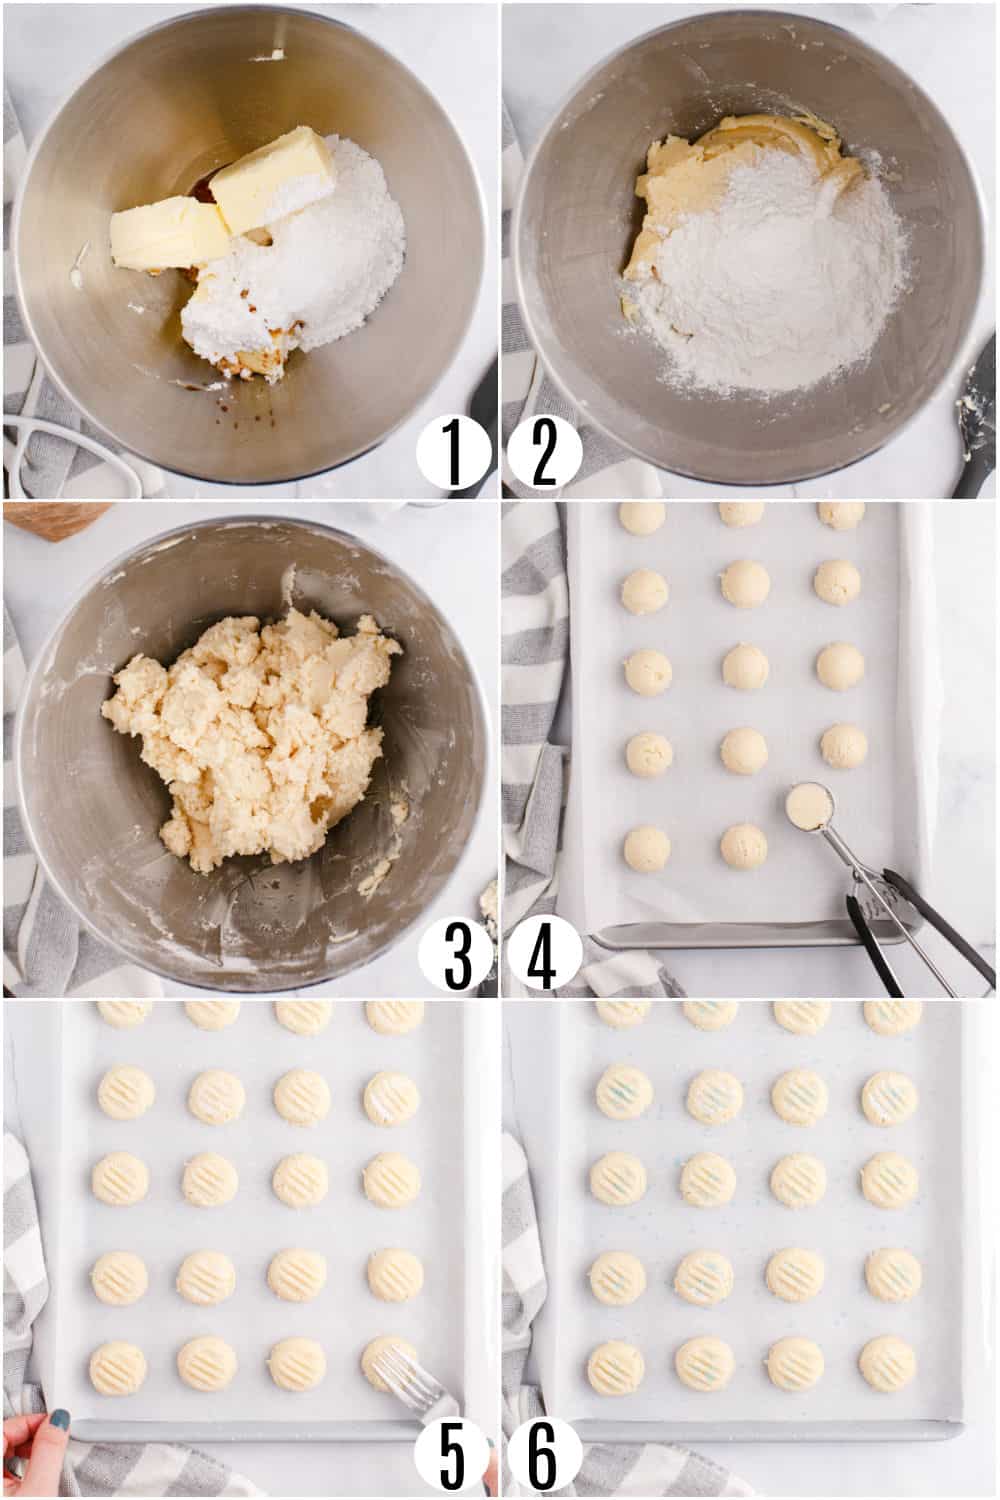 Step by step photos showing how to make whipped shortbread with sprinkles.